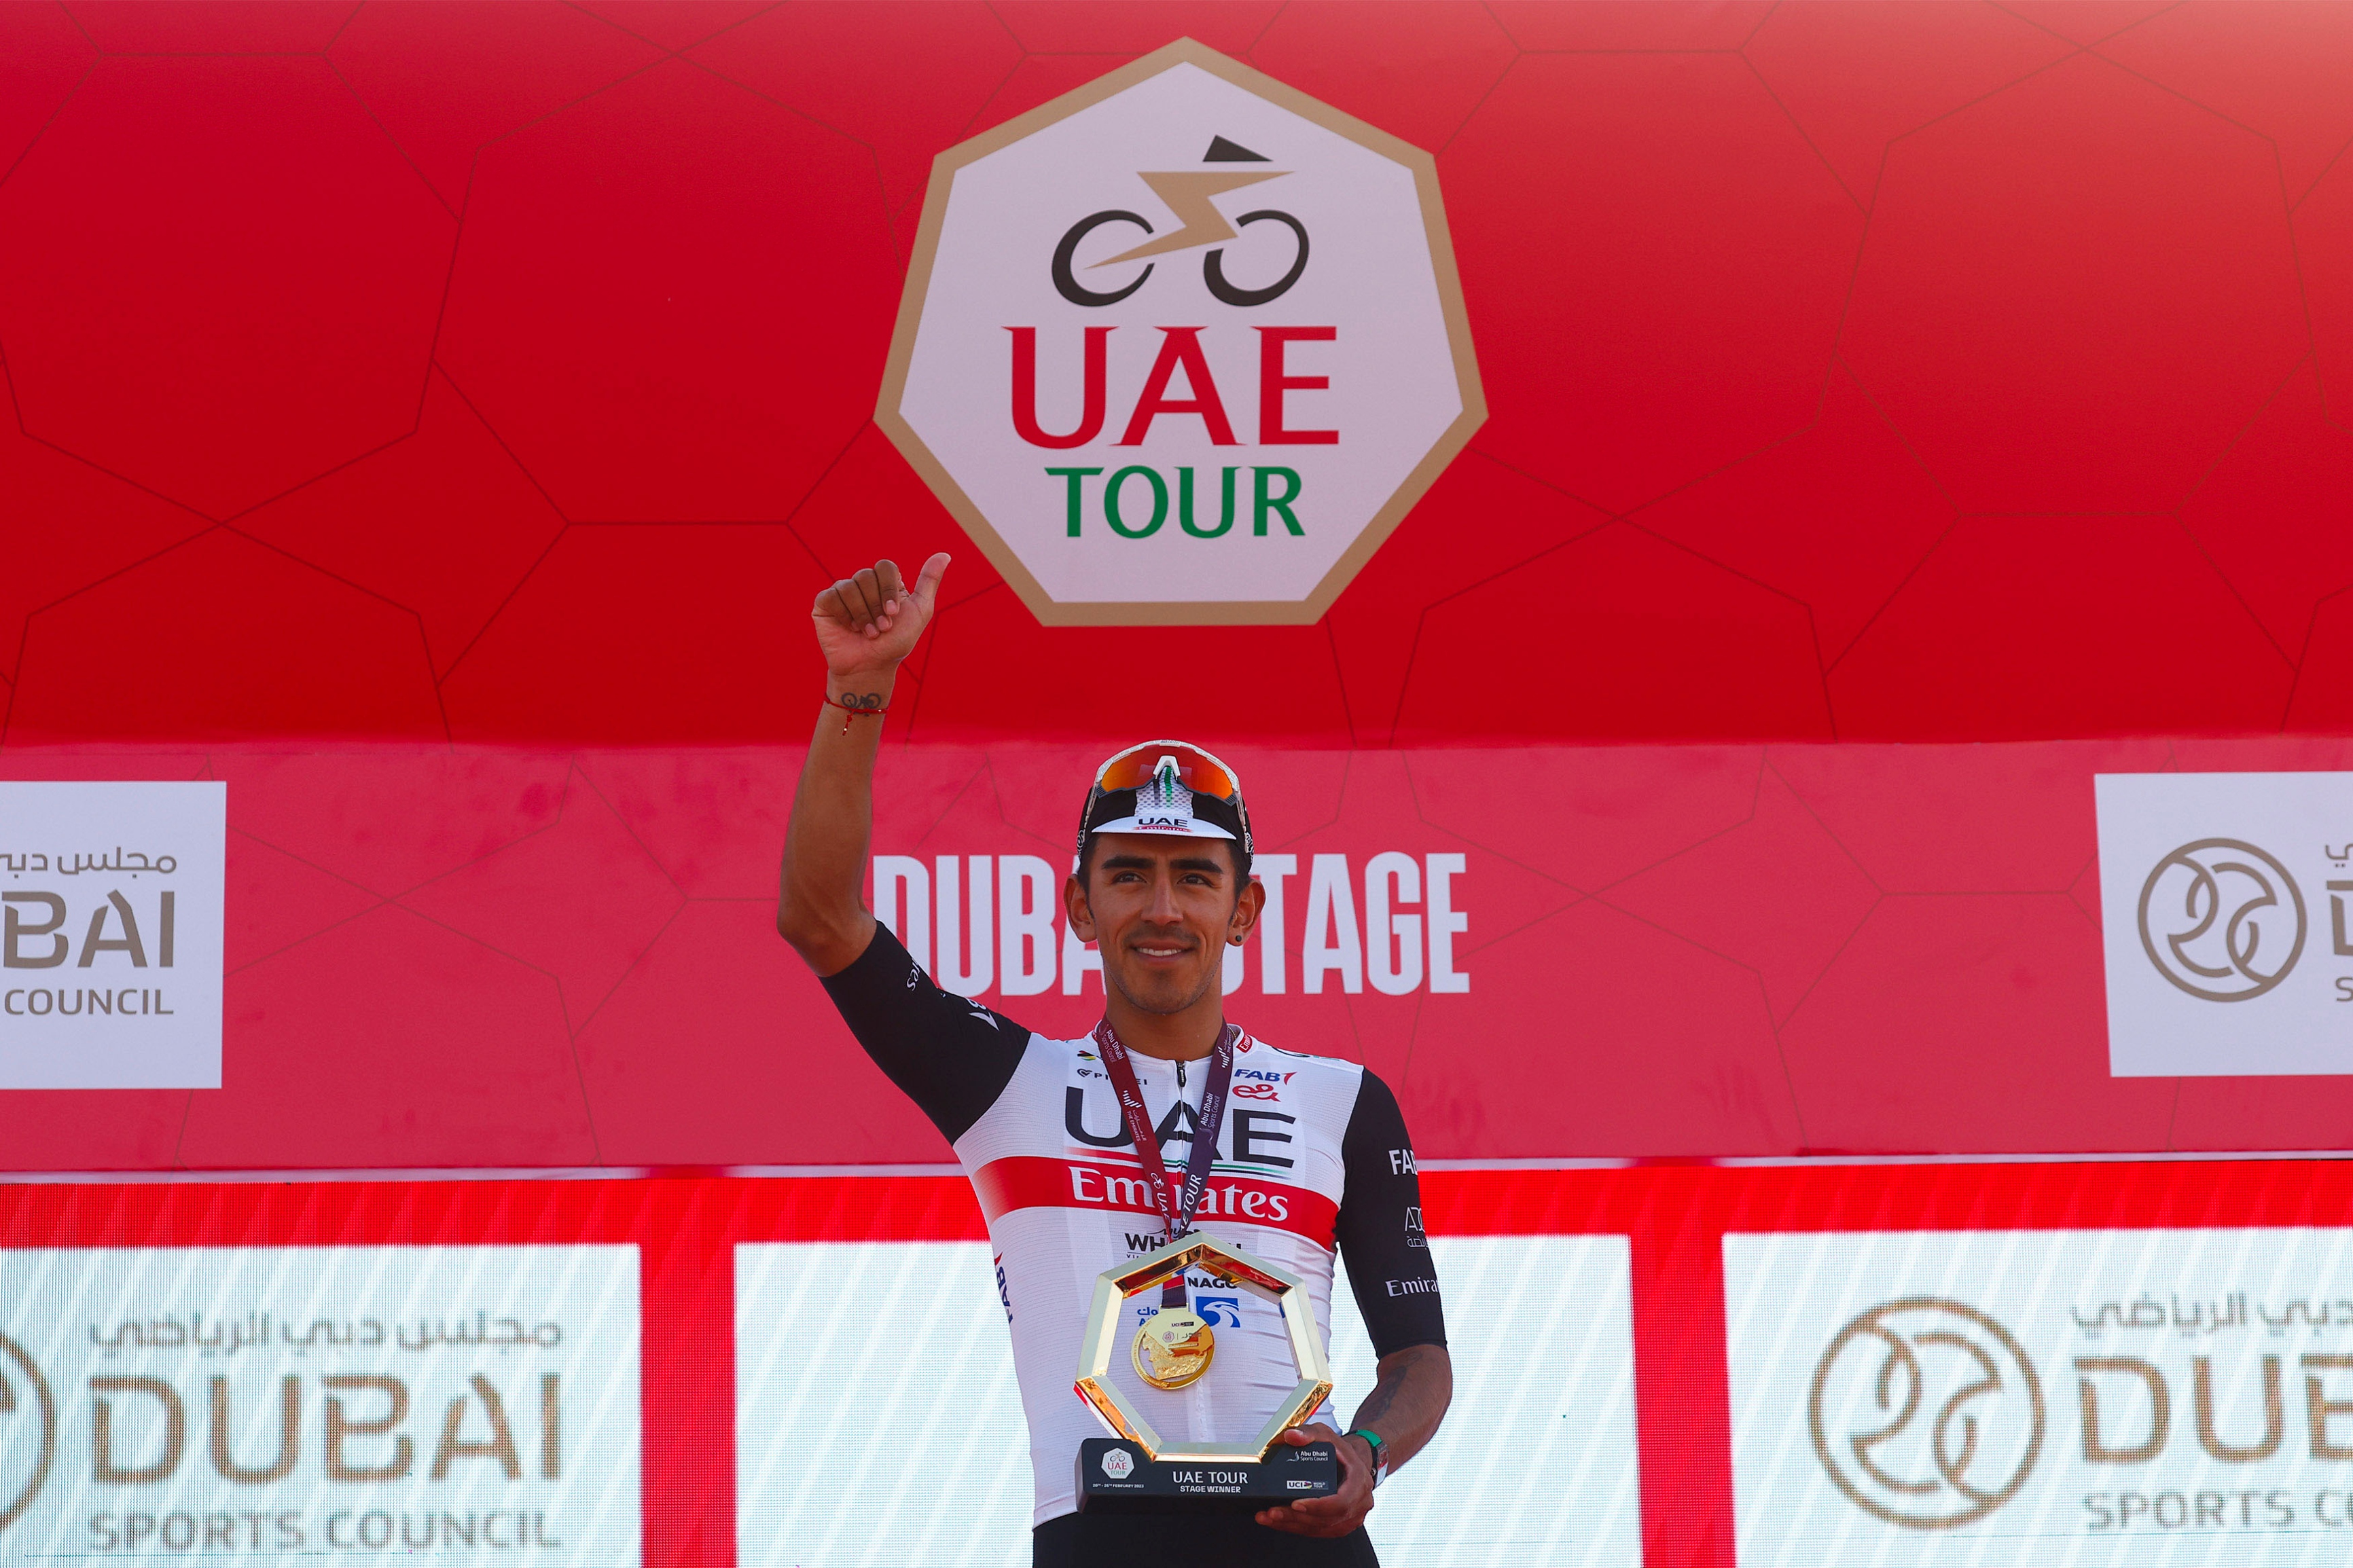 The riders of the Emirates team, Molano, champion of the Dubai stage in the Tour